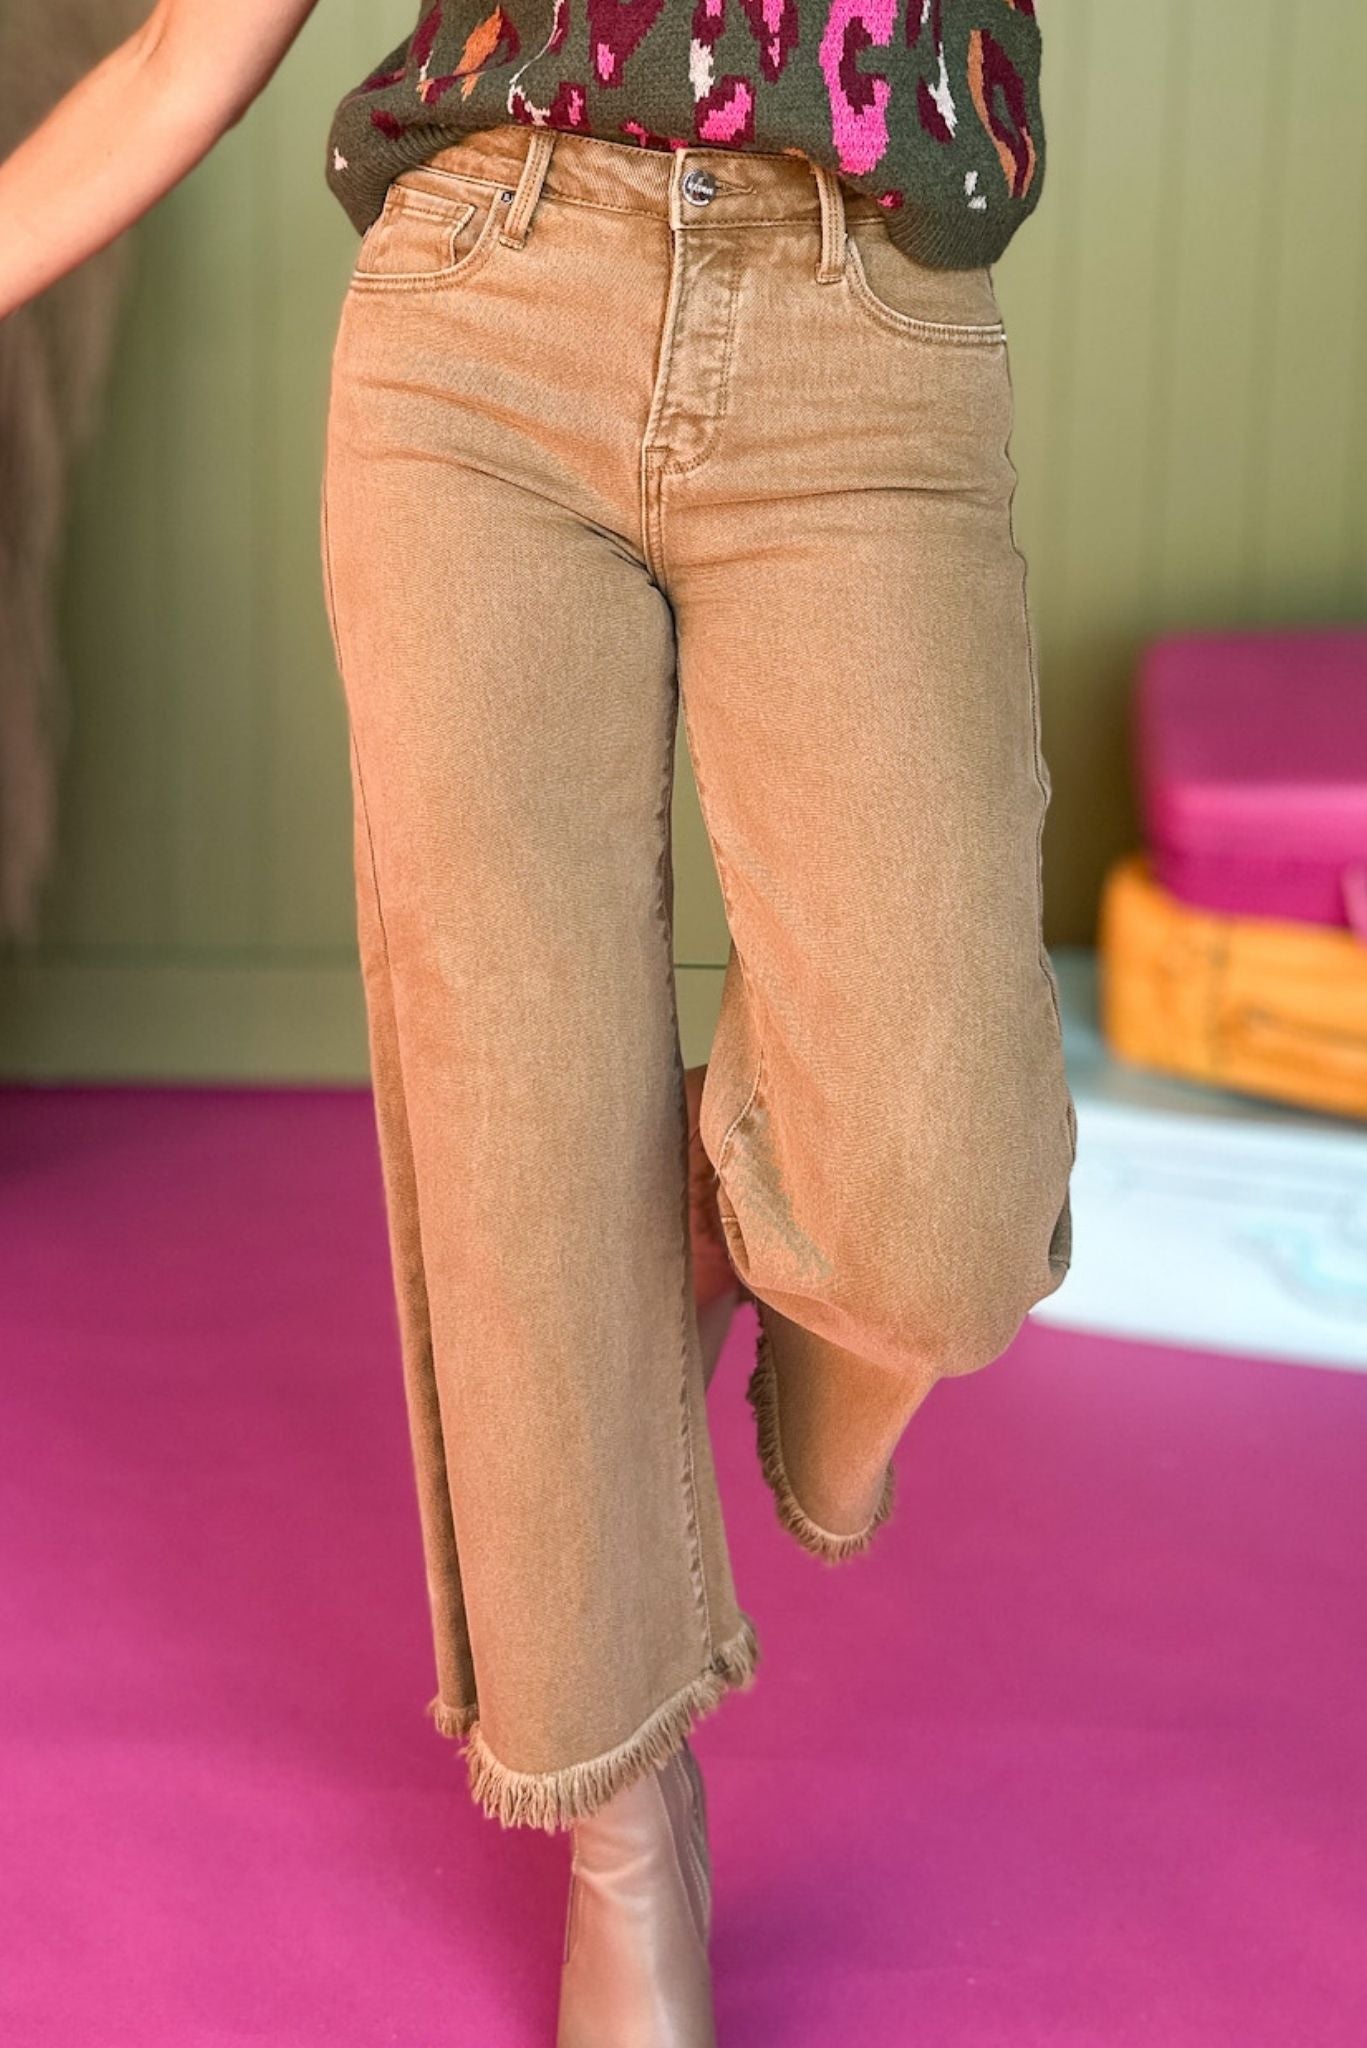 Risen Mocha Washed High Rise Cropped Wide Leg Jeans, must have jeans, must have style, fall jeans, fall fashion, affordable fashion, mom style, elevated jeans, shop style your senses by mallory fitzsimmons